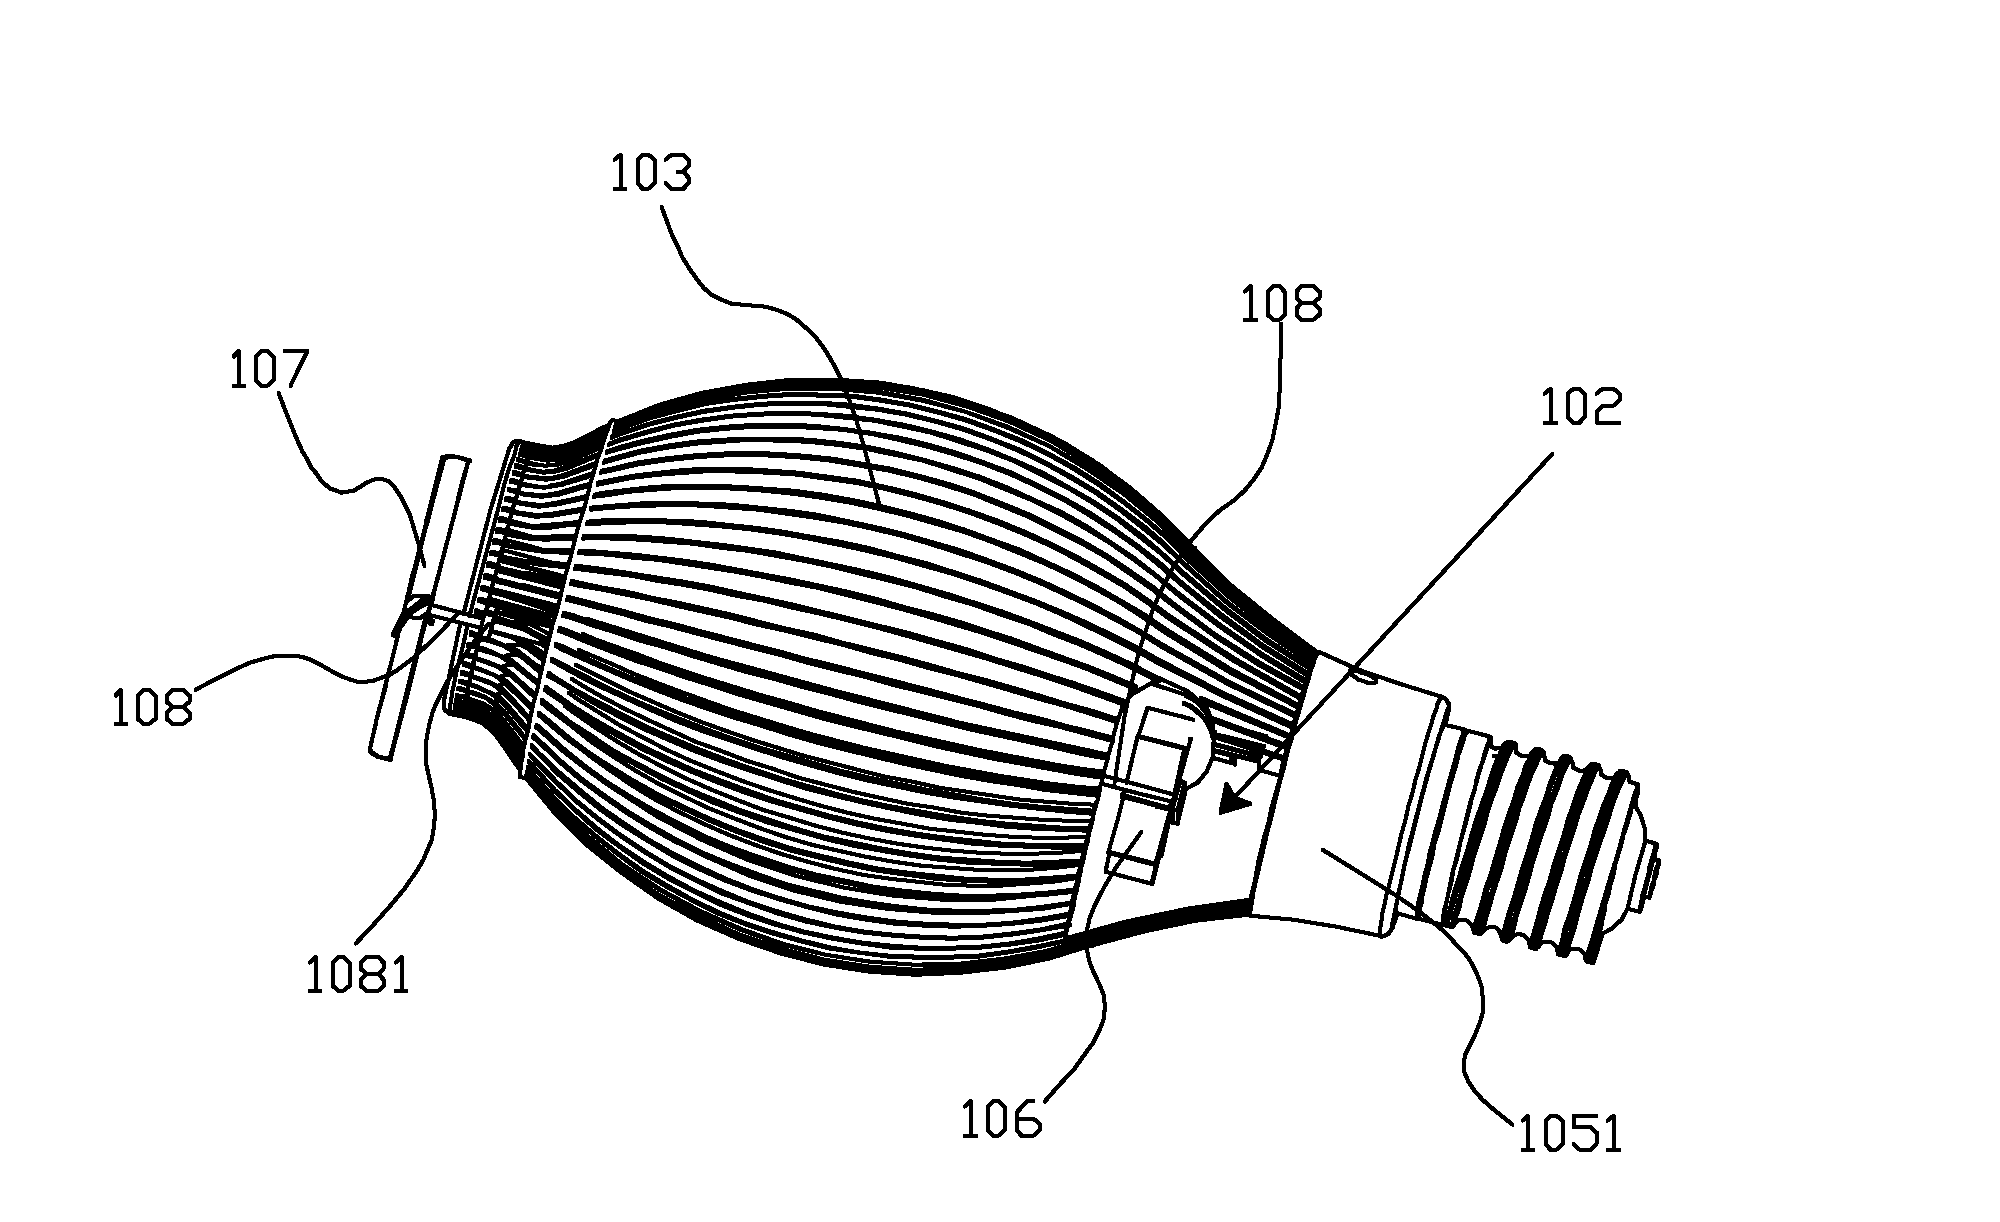 LED Street Lamp and a Street Lamp Fixing Device